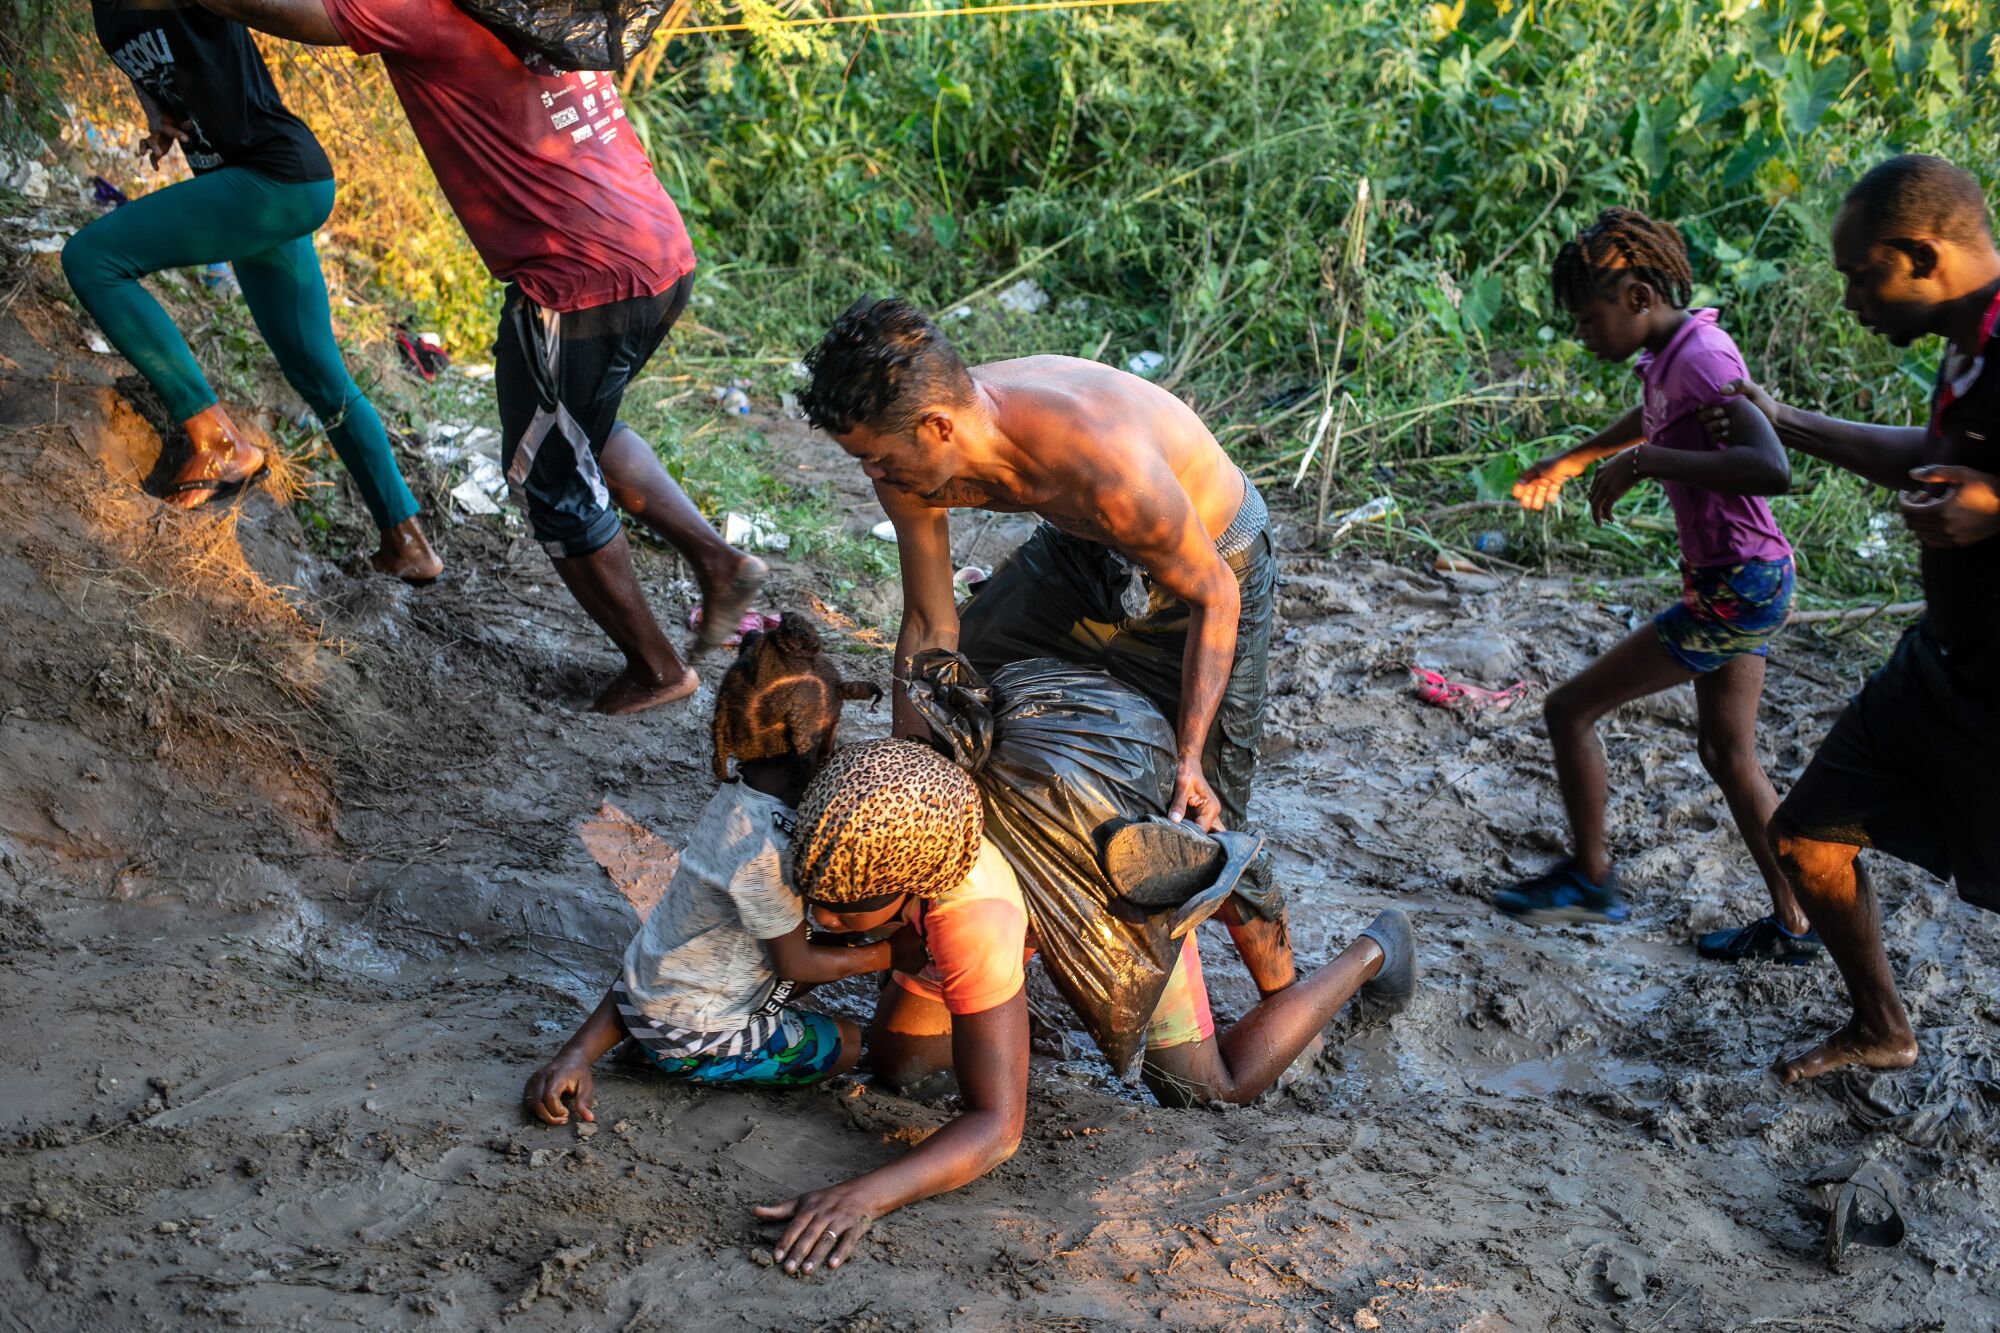 A Haitian immigrant falls in the mud after wading across the Rio Grande and back onto Mexico's shore.